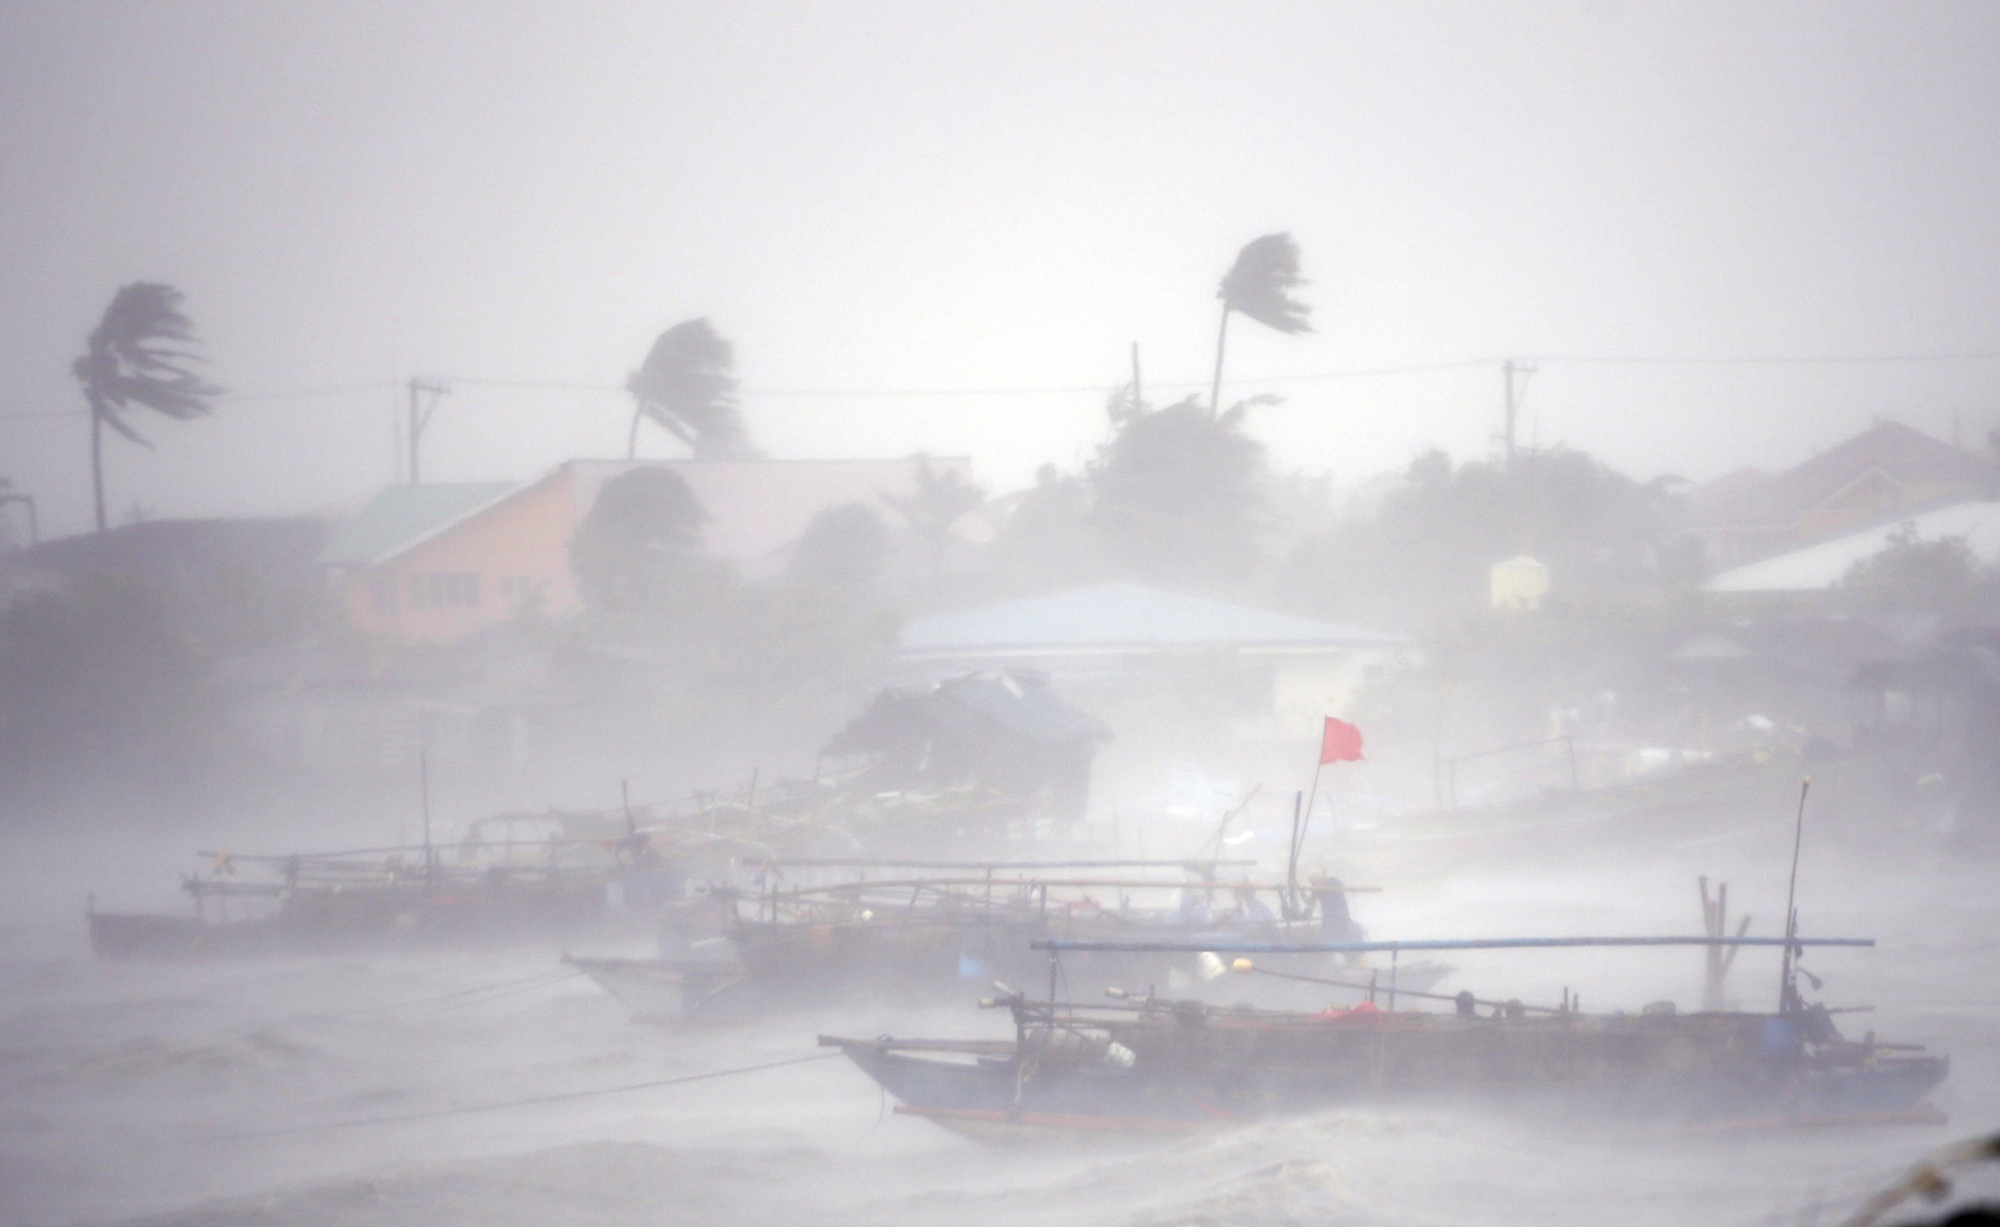 Fishing boats are pictured amid heavy winds and rain brought by Typhoon Rammasun as it hit the town of Imus, Cavite southwest of Manila, July 16, 2014.